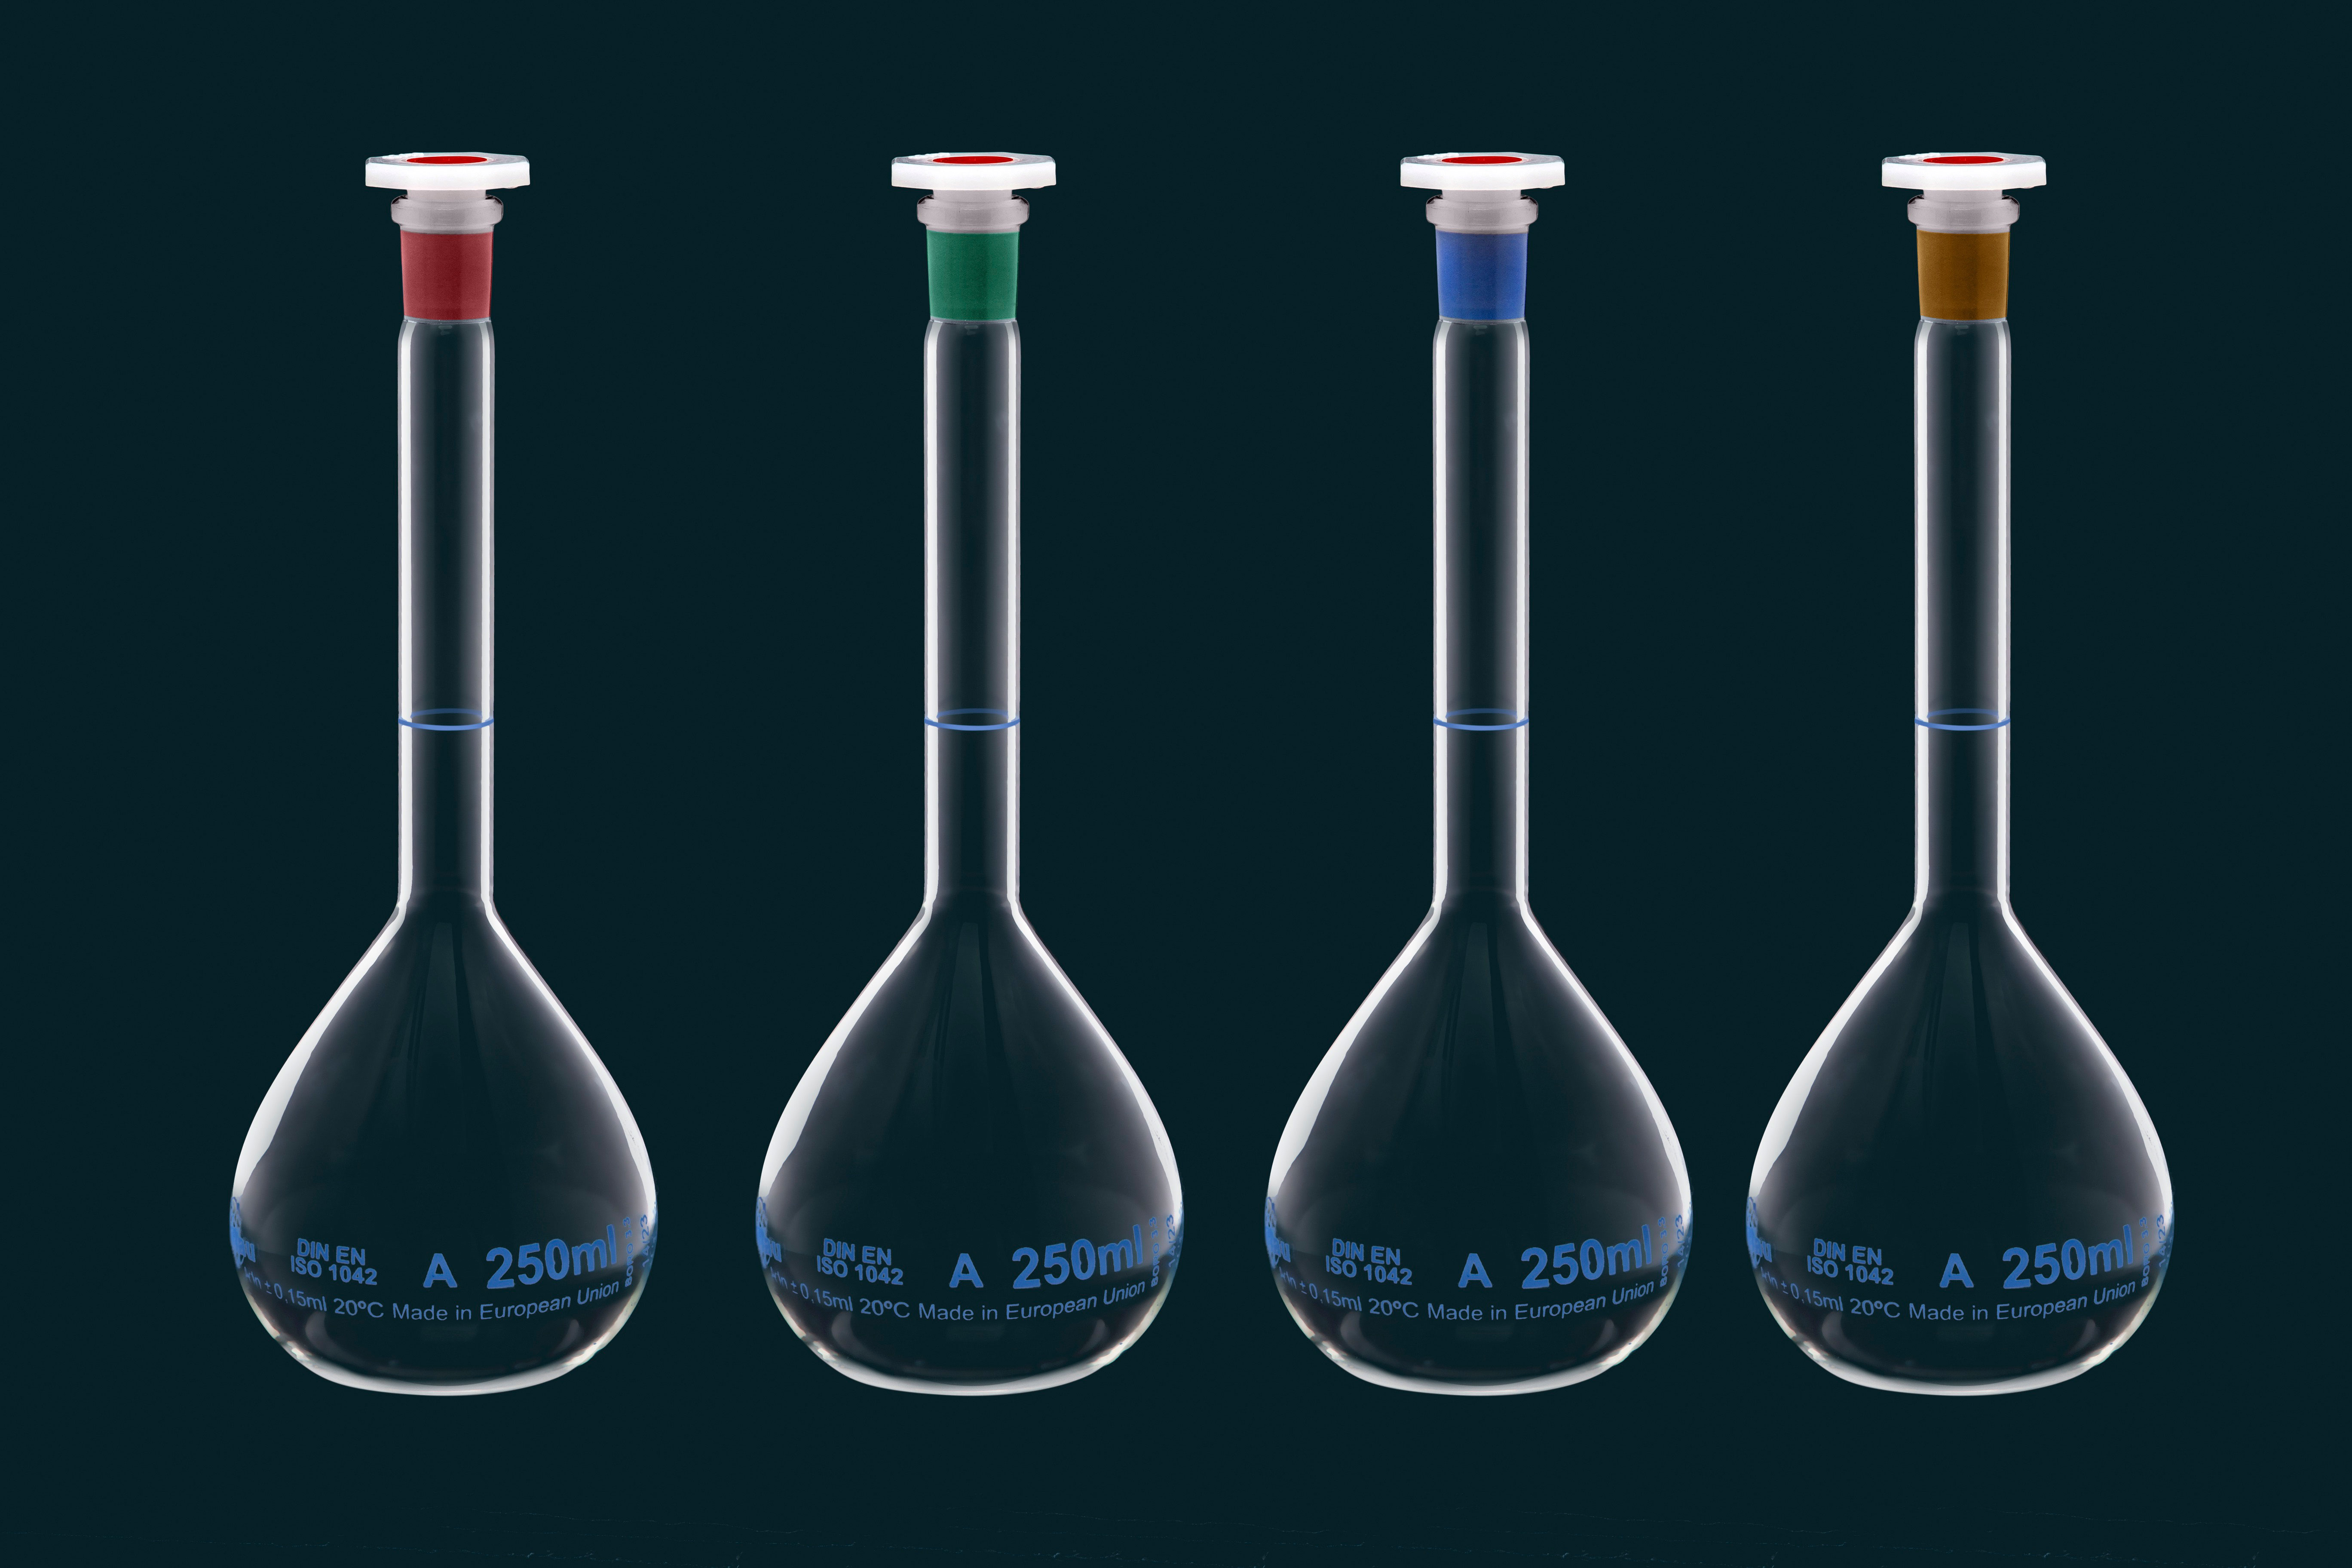 Volumetric flask with green neck, Class A, 20 ml, with PE stopper, lot number and certificate of conformity